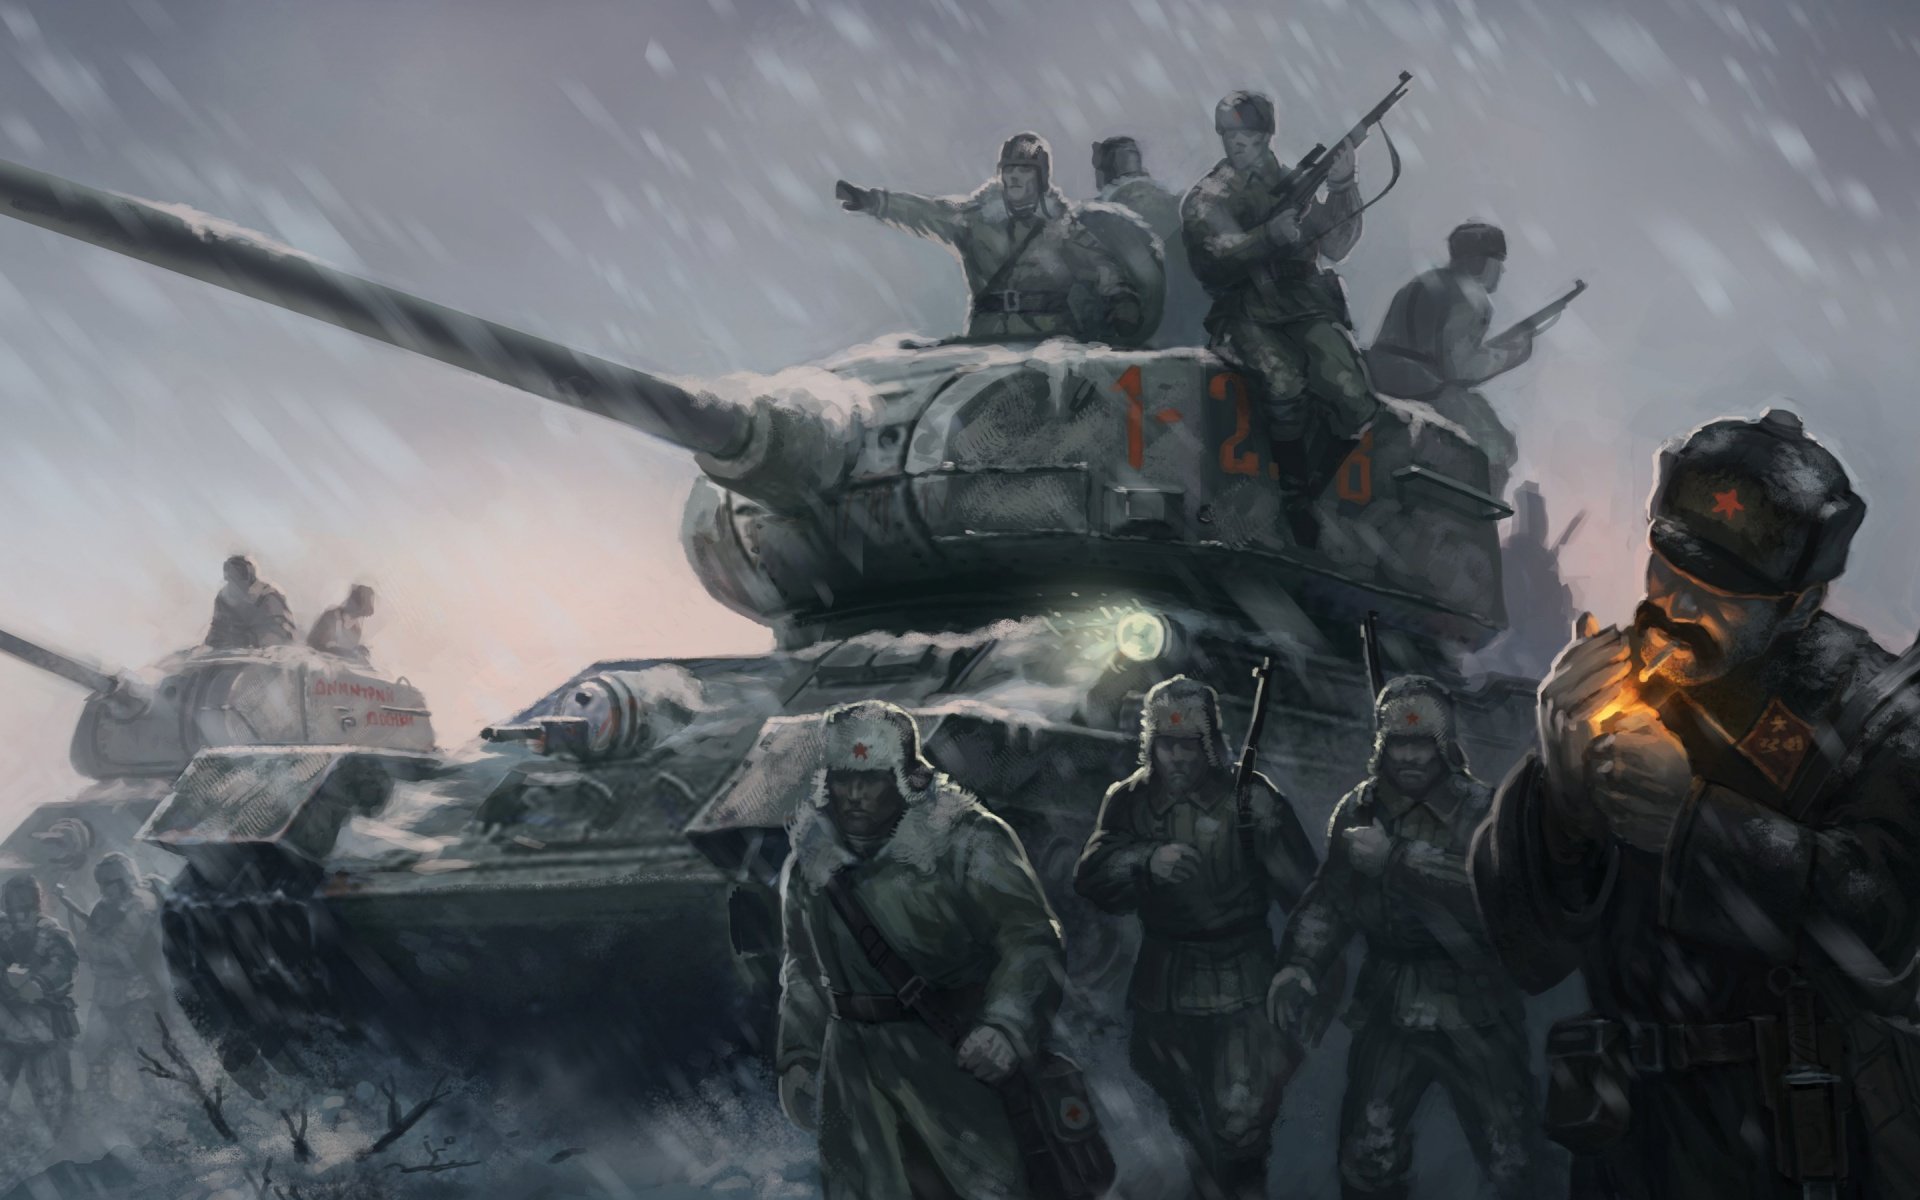 720p company of heroes 2 wallpaper